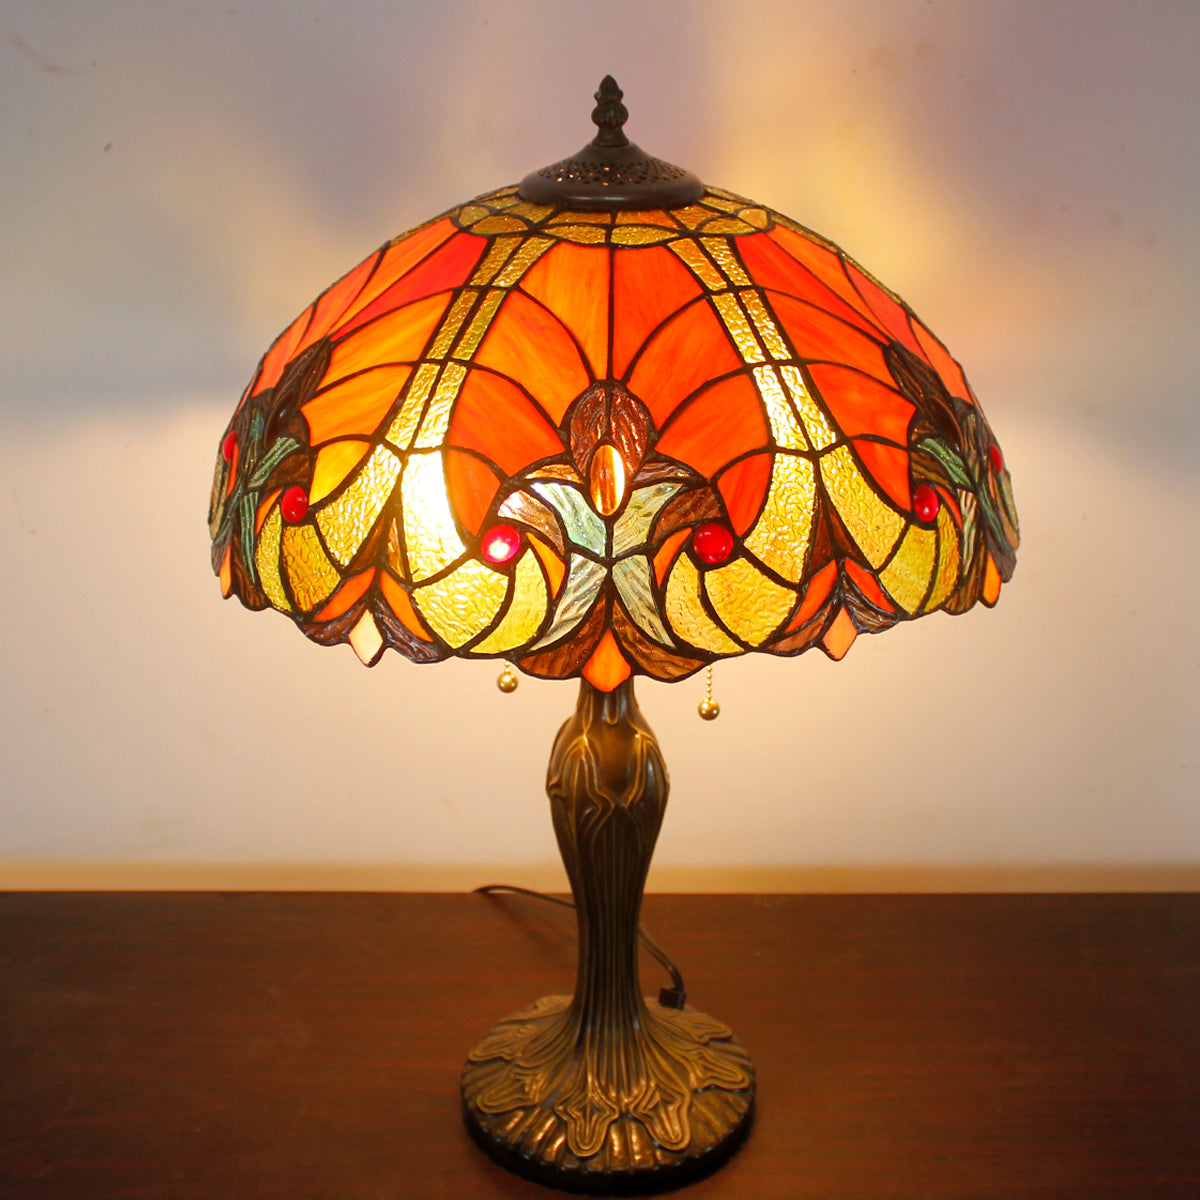  Table Lamp Red Liaison Stained Glass Style Shade Metal Base 24" Tall Large Bedside Desk Light Living Room Bedroom Country Farmhouse Luxurious Memory Lamp Sympathy LED Bulb Included